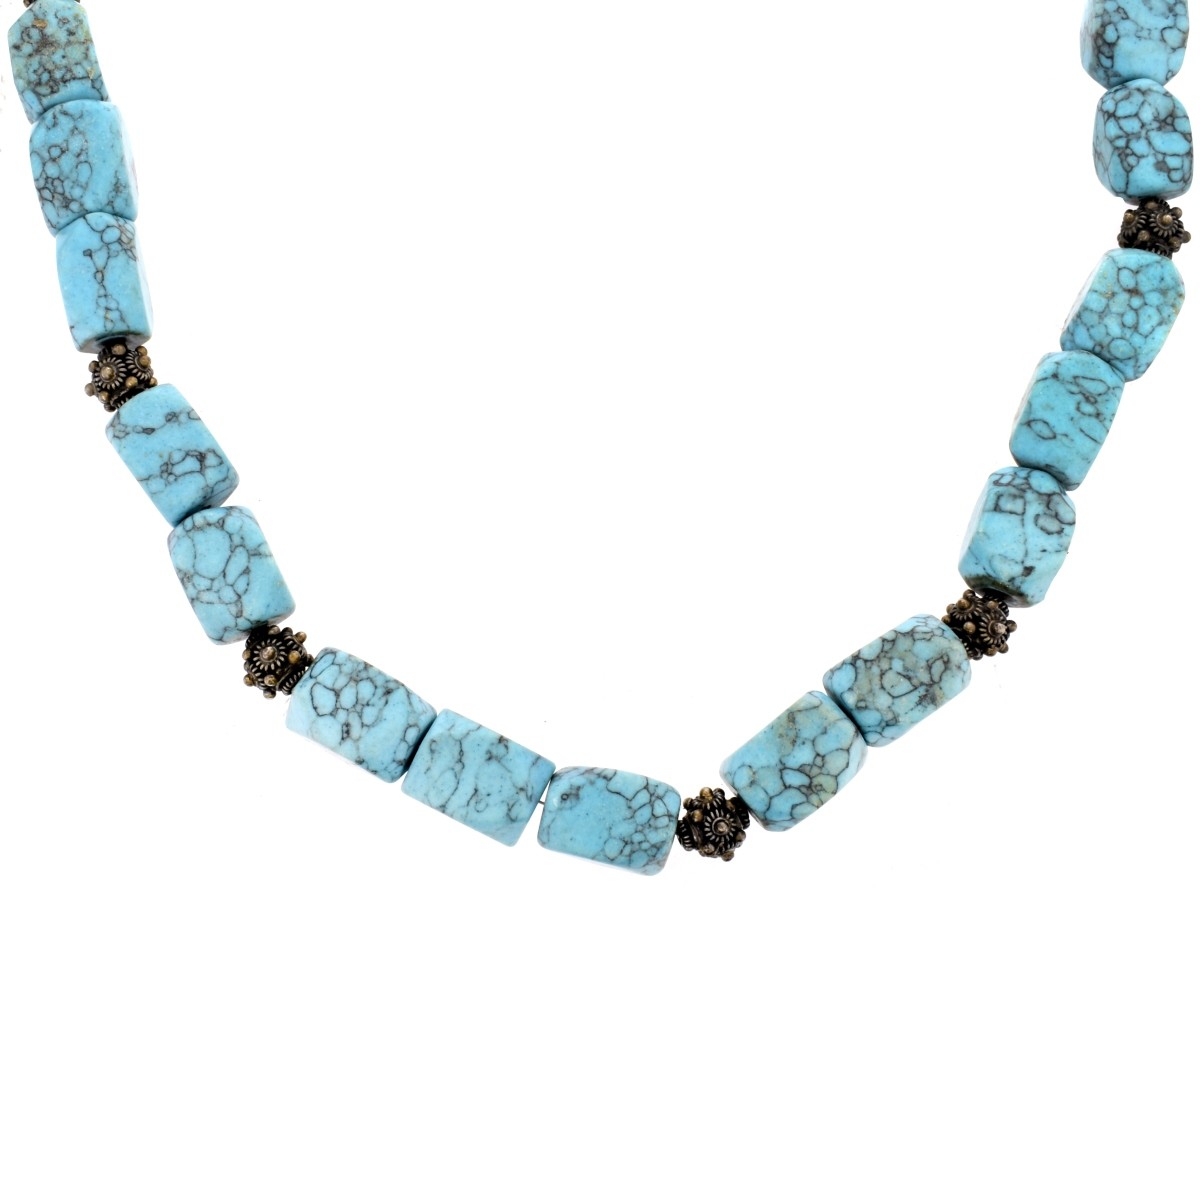 Vintage Turquoise and Silver Necklace